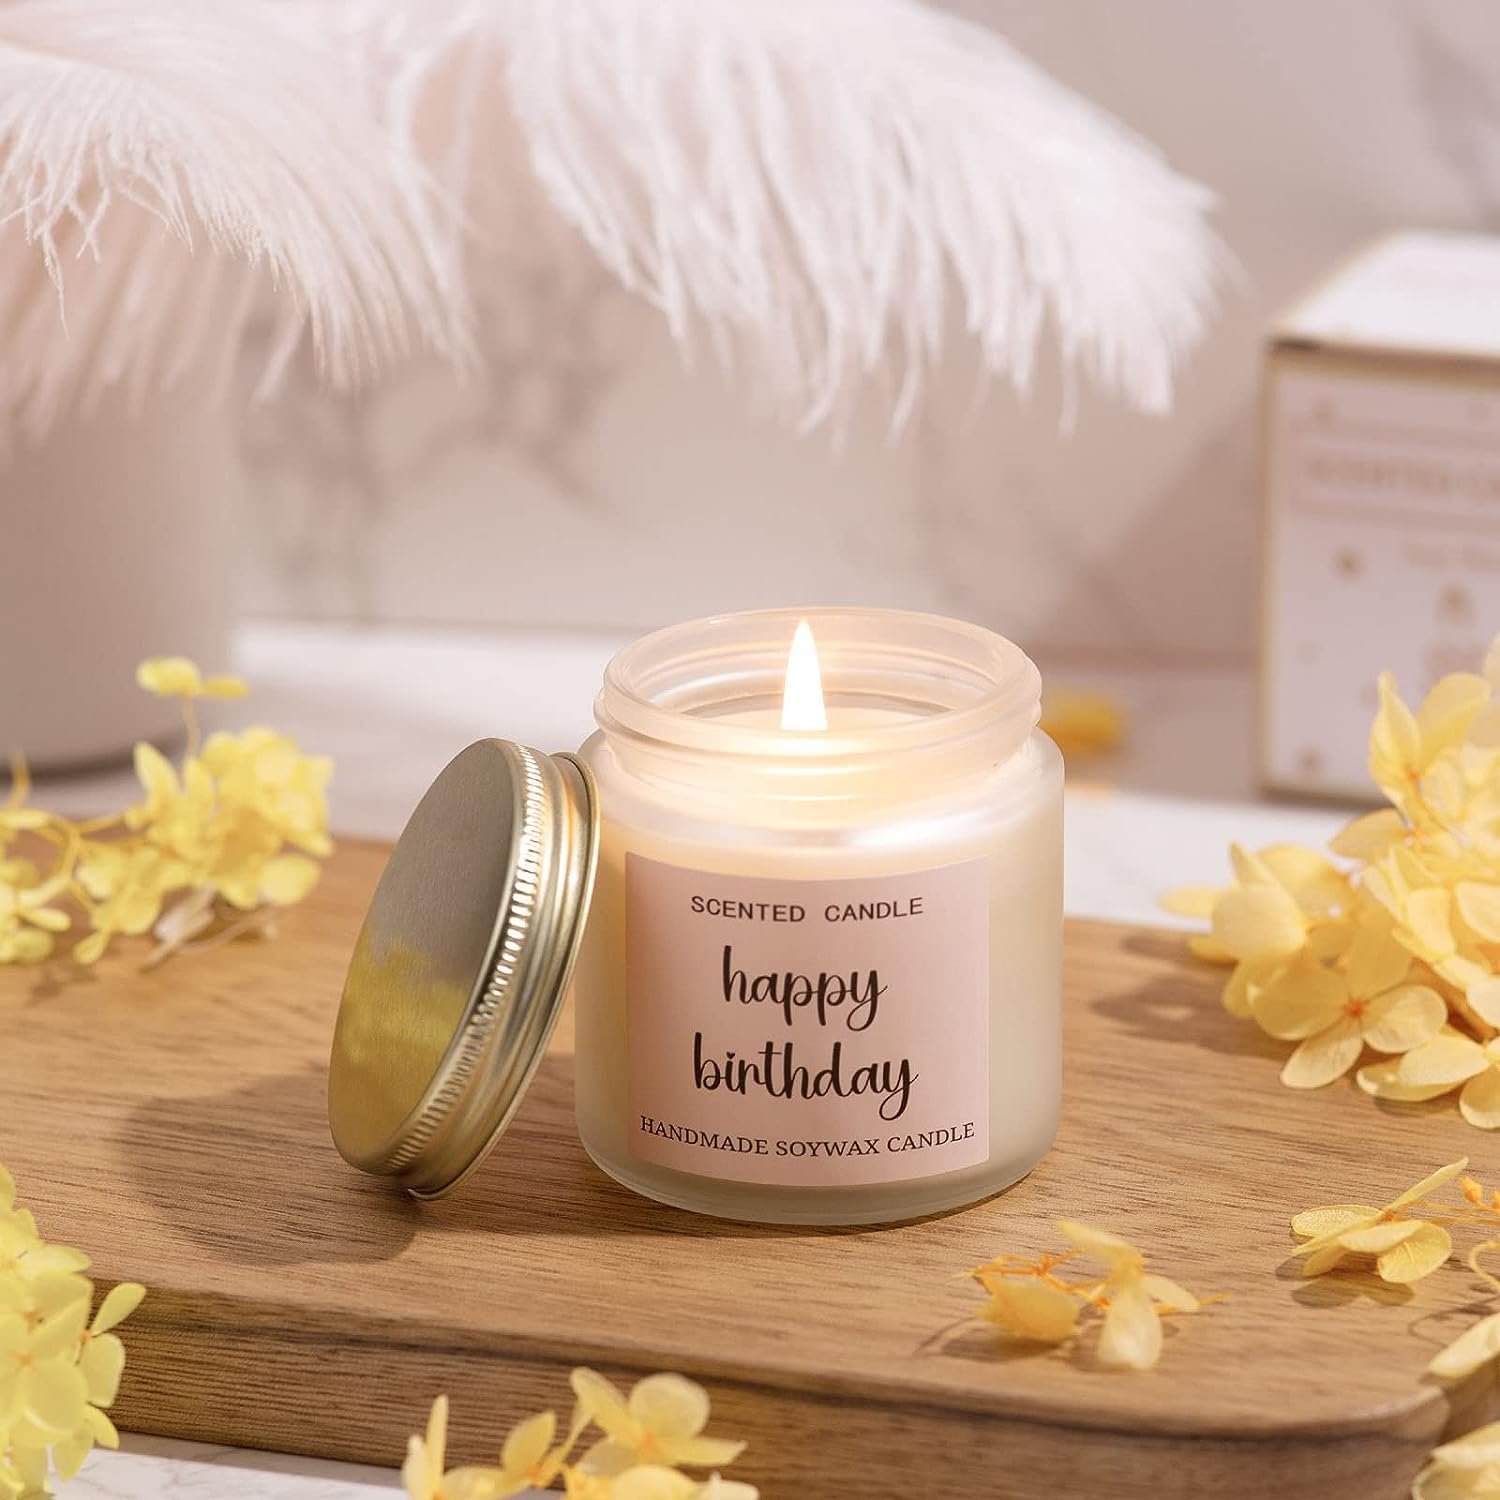 Birthday Gifts for Women,Happy Bath Set Relaxing Spa Gift Baskets Ideas Her, Mom, Sister, Female Friends, Coworker, Wife, Girlfriend, Daughter, Unique Women Who Have Everything